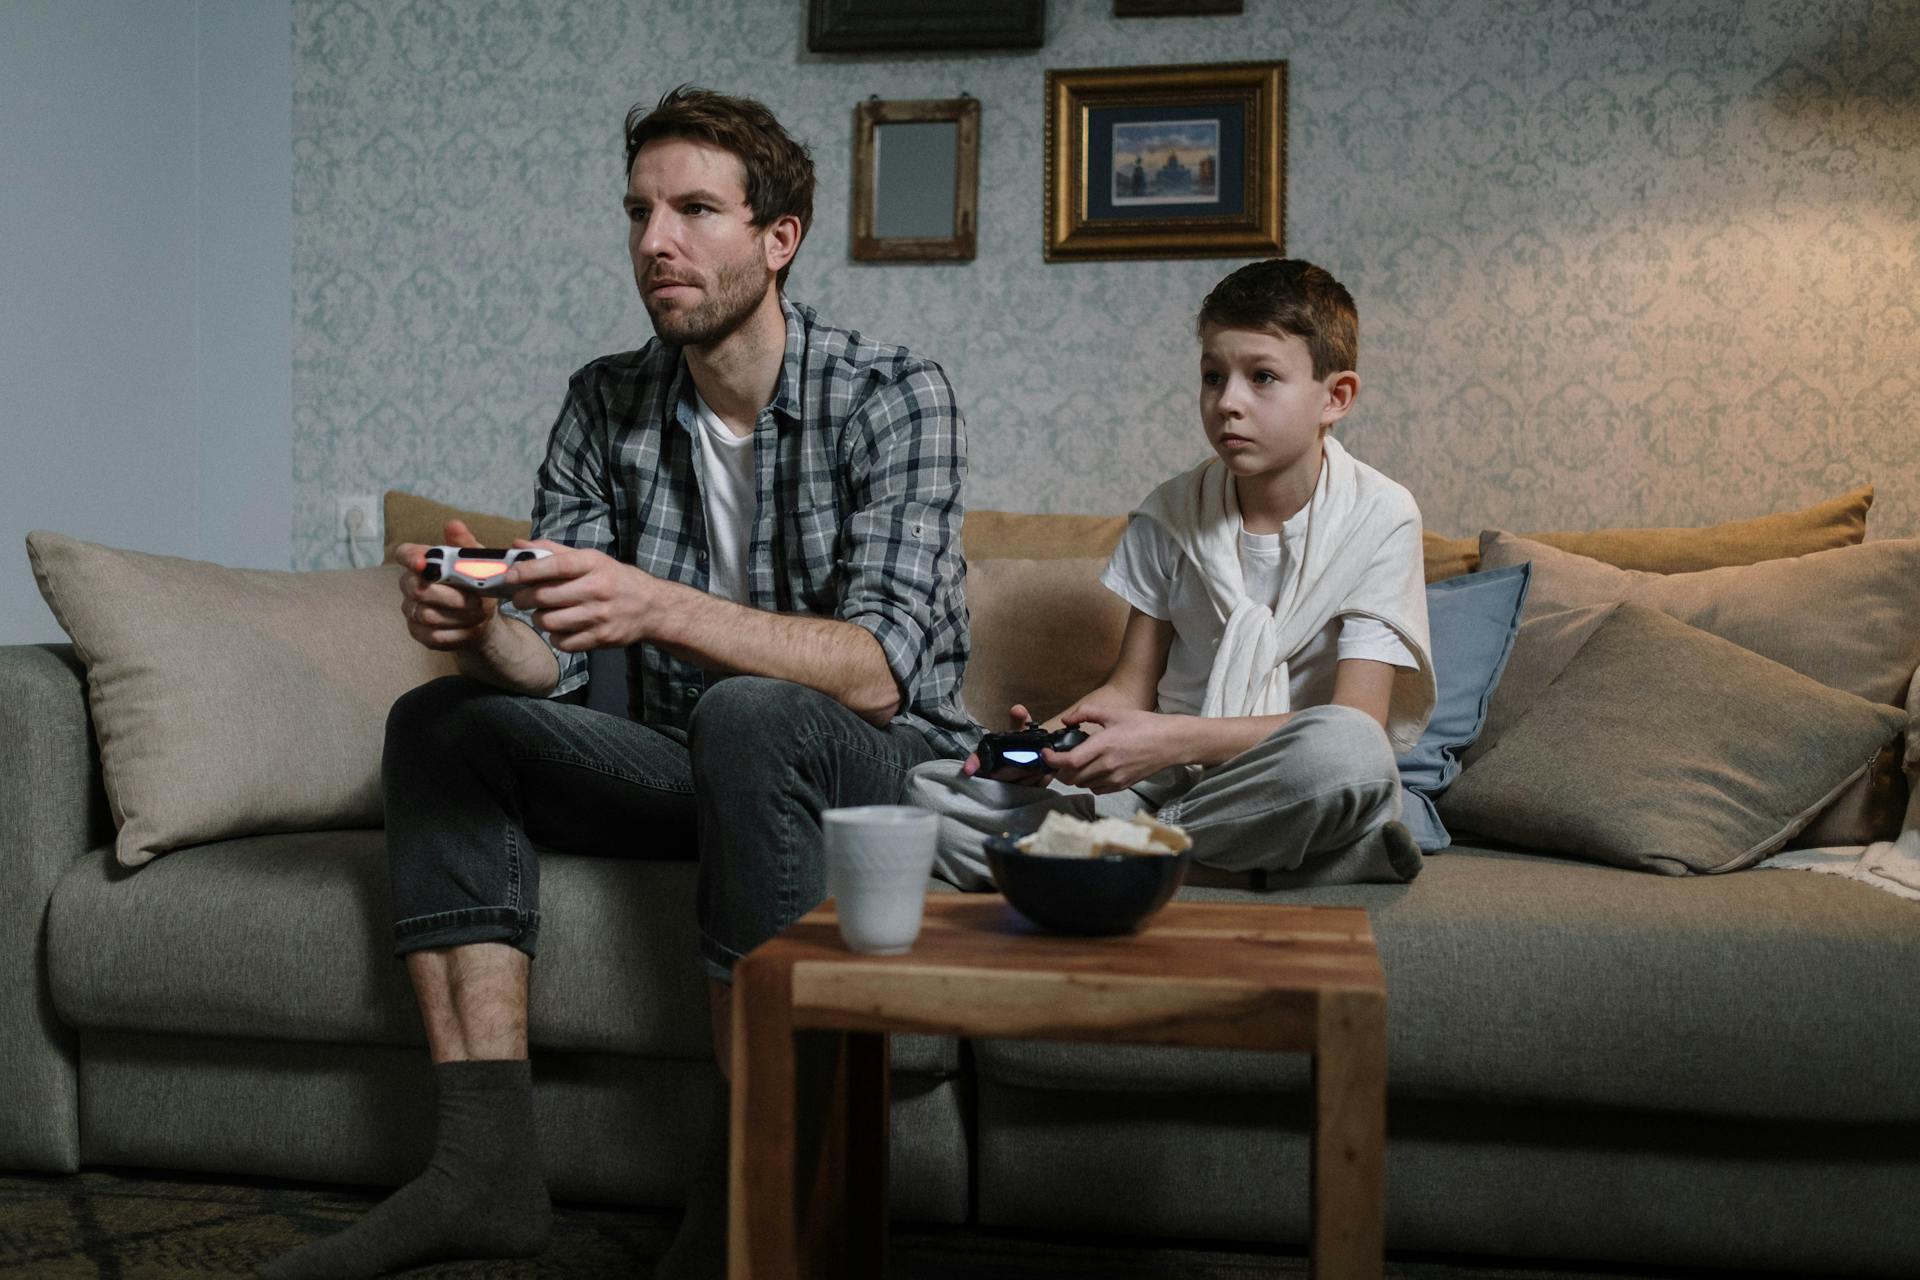 Dad and son playing video game | Source: Pexels